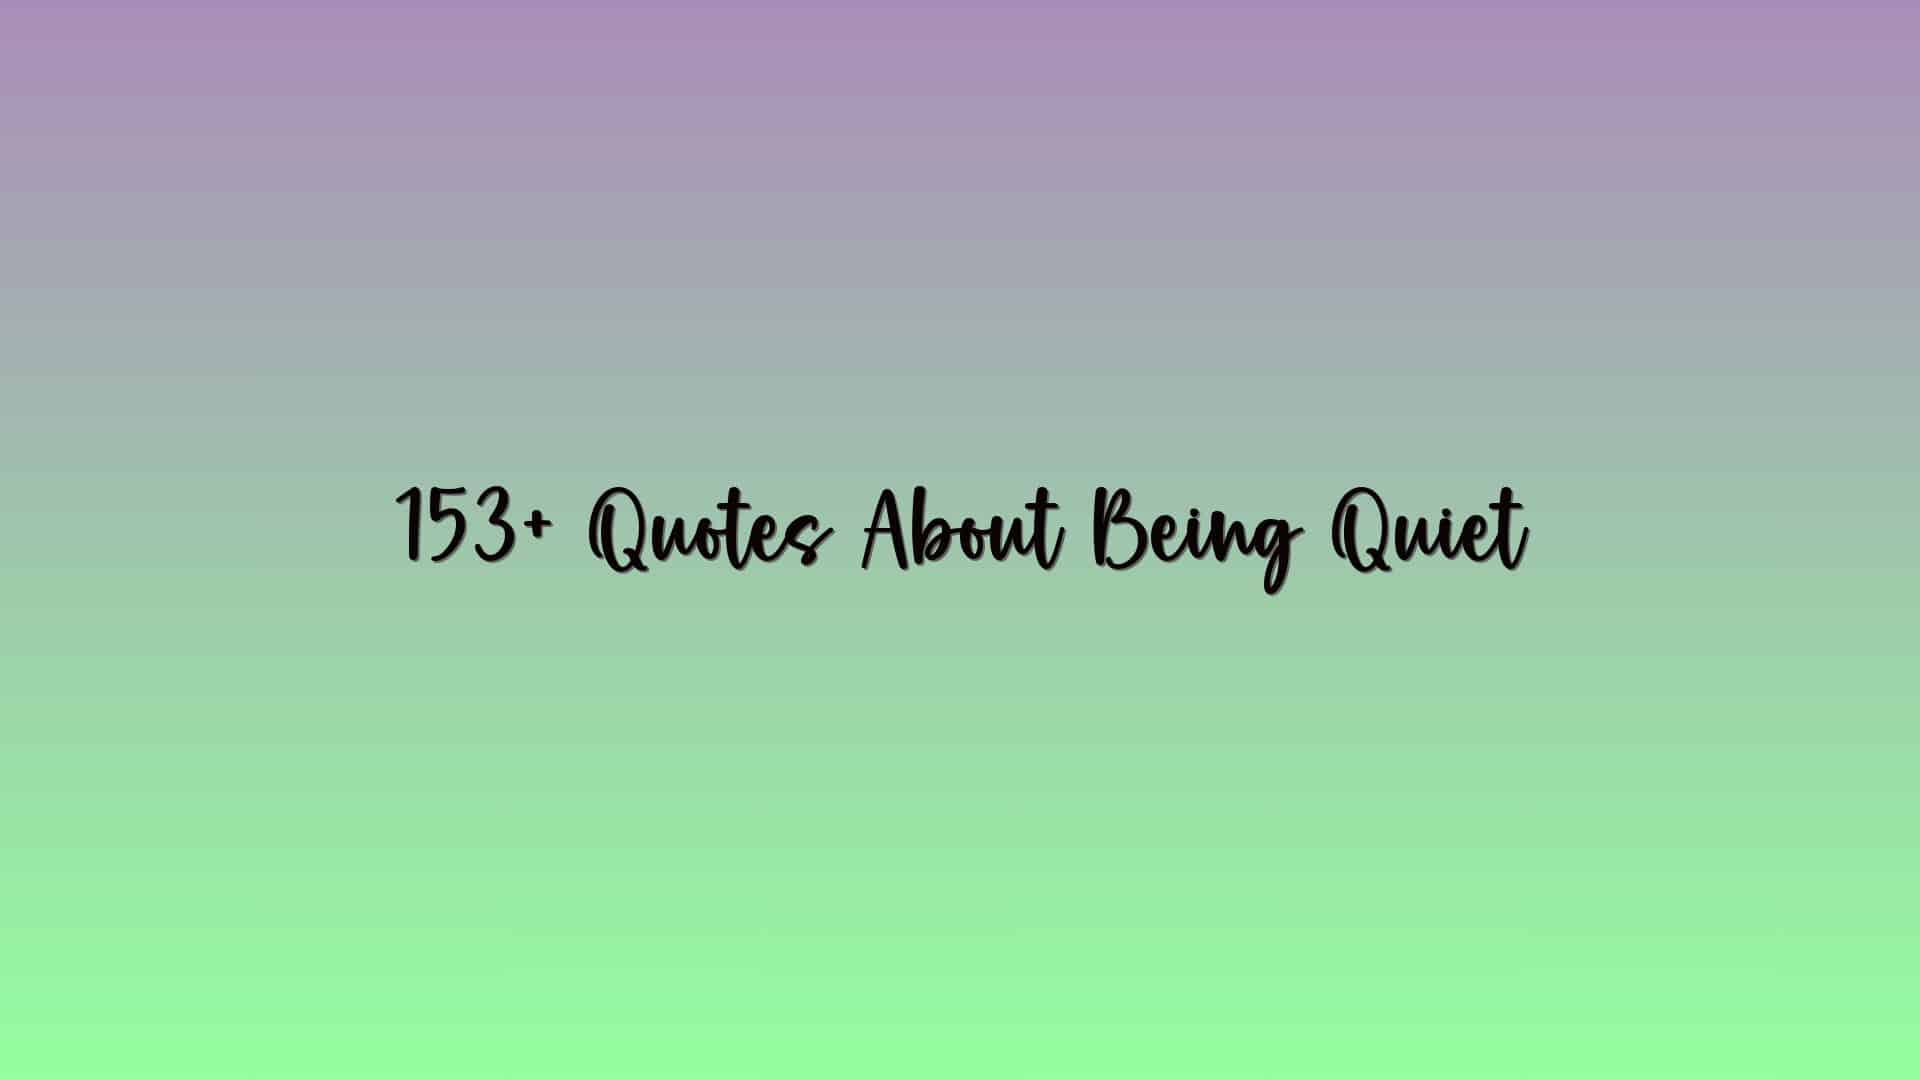 153+ Quotes About Being Quiet